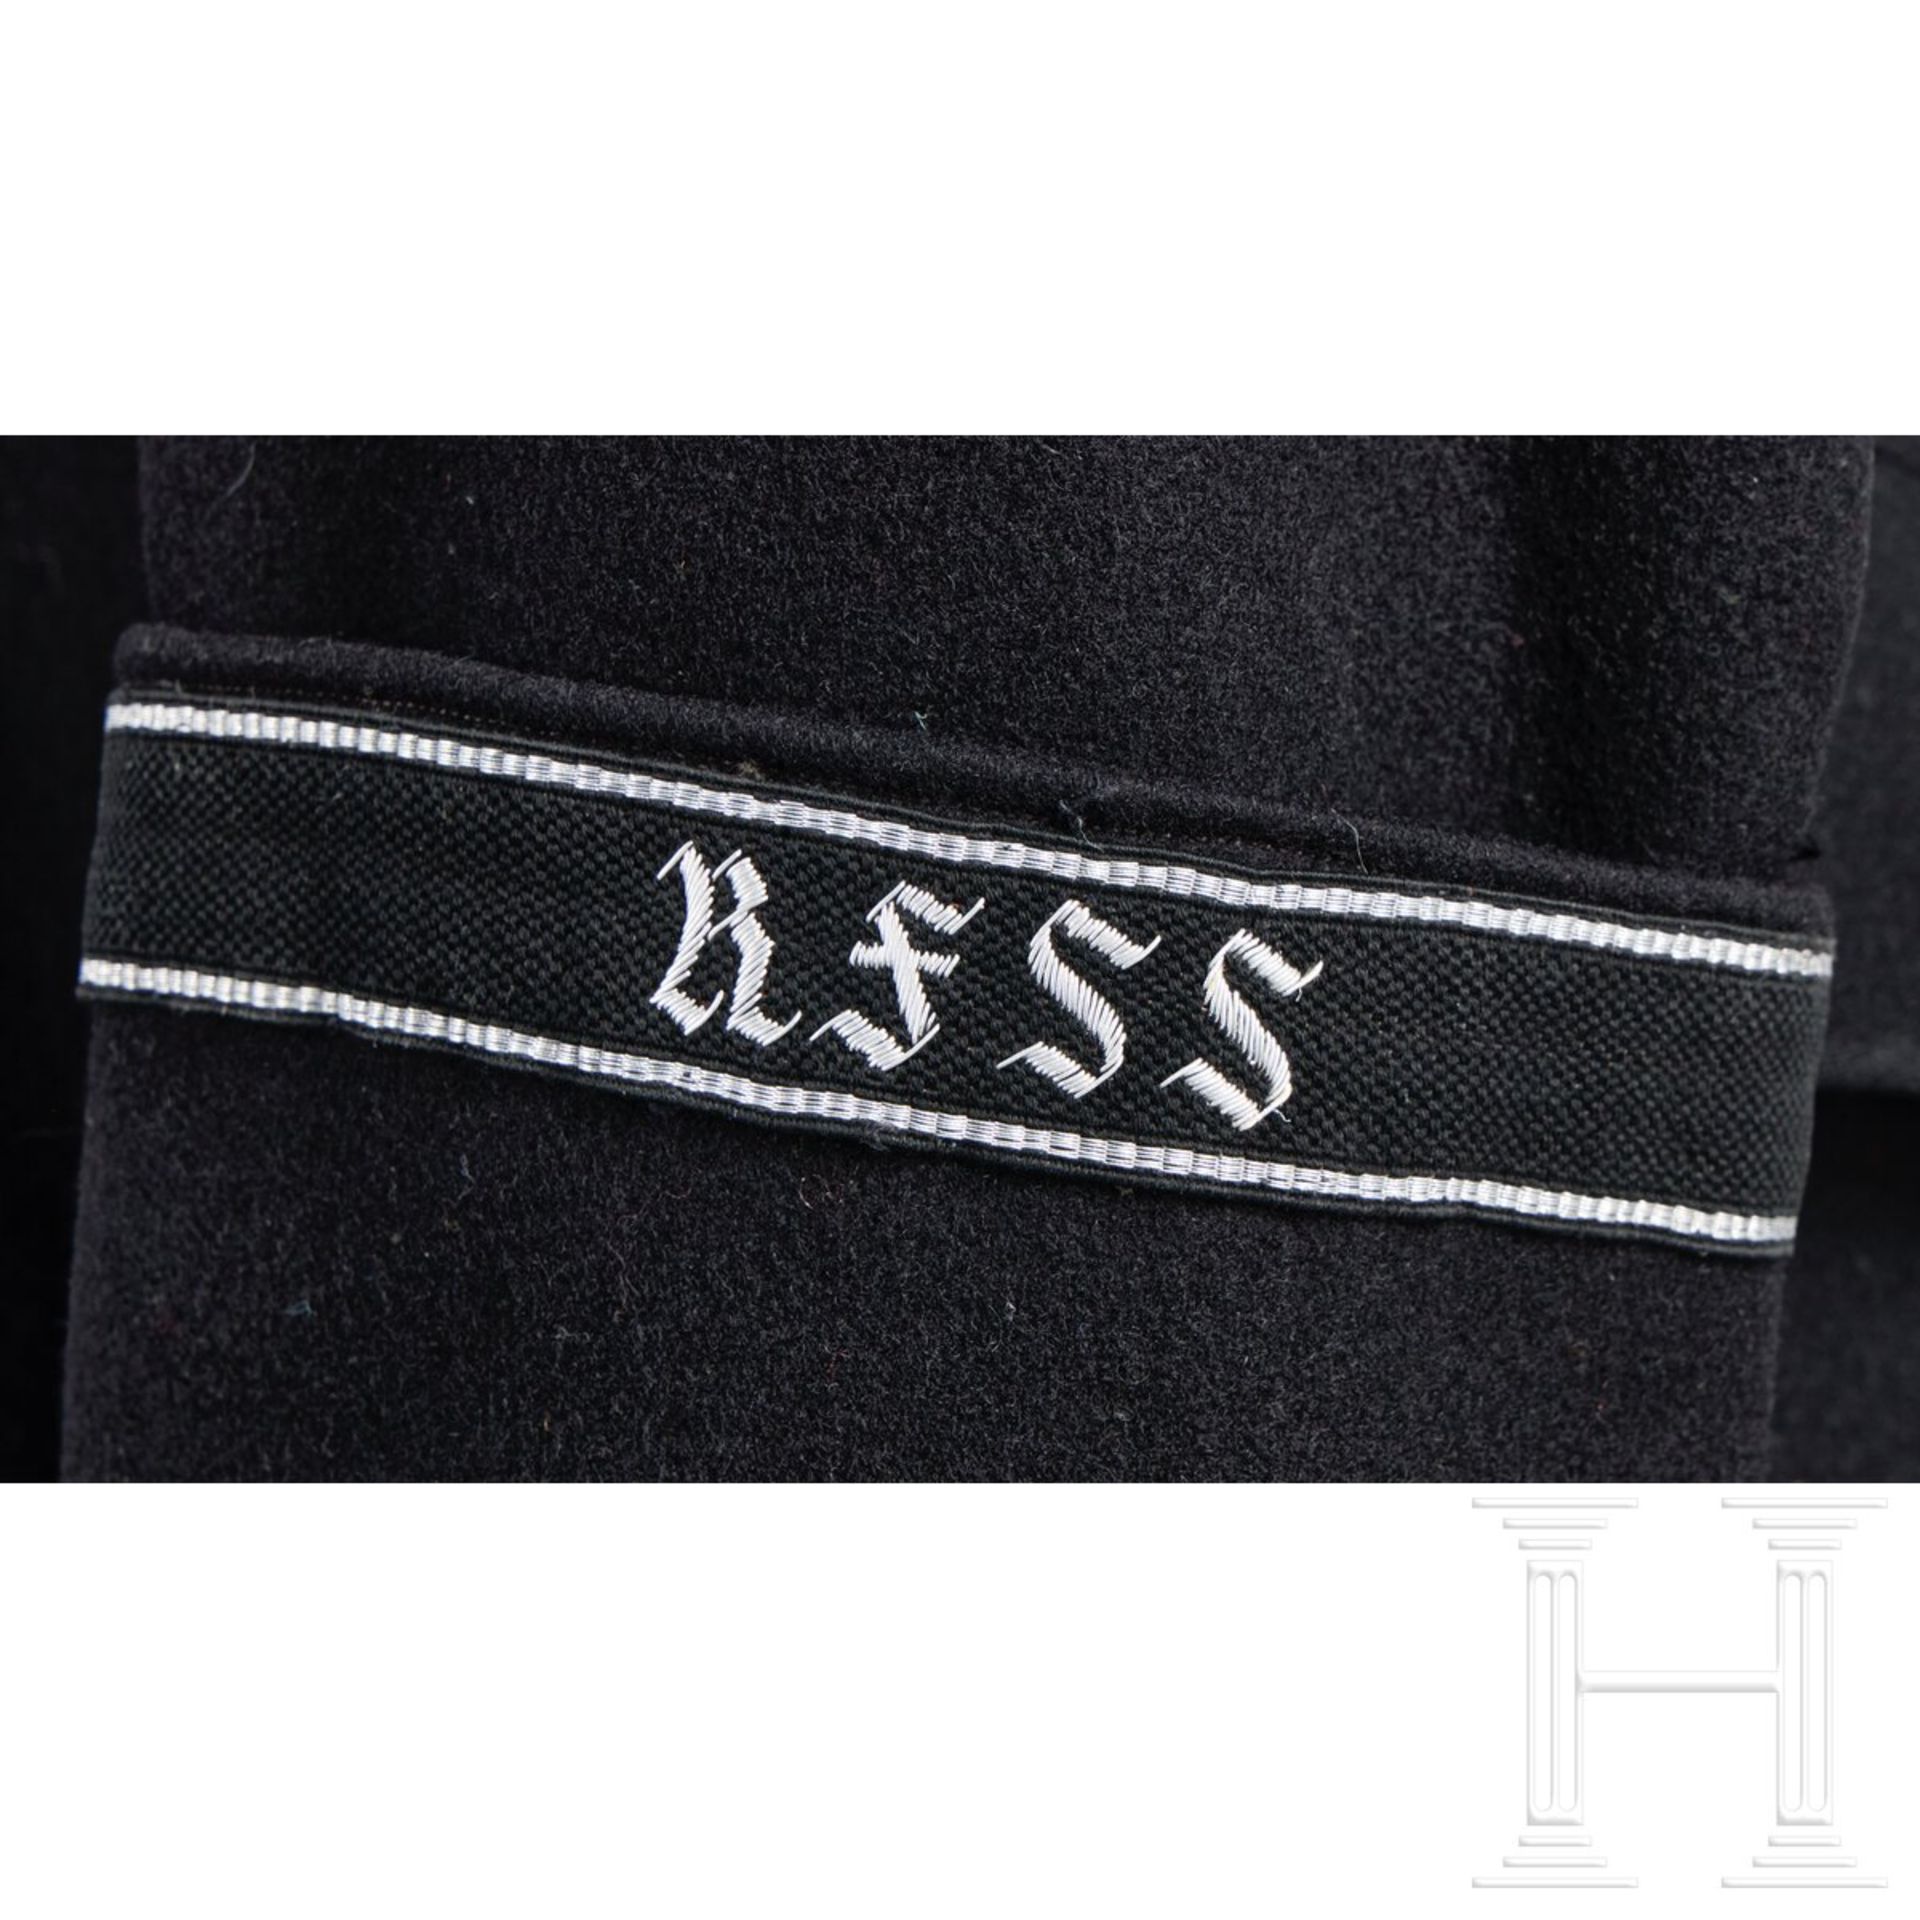 An Overcoat for a member of the Personal Staff of the Reichsführer-SS - Bild 9 aus 10